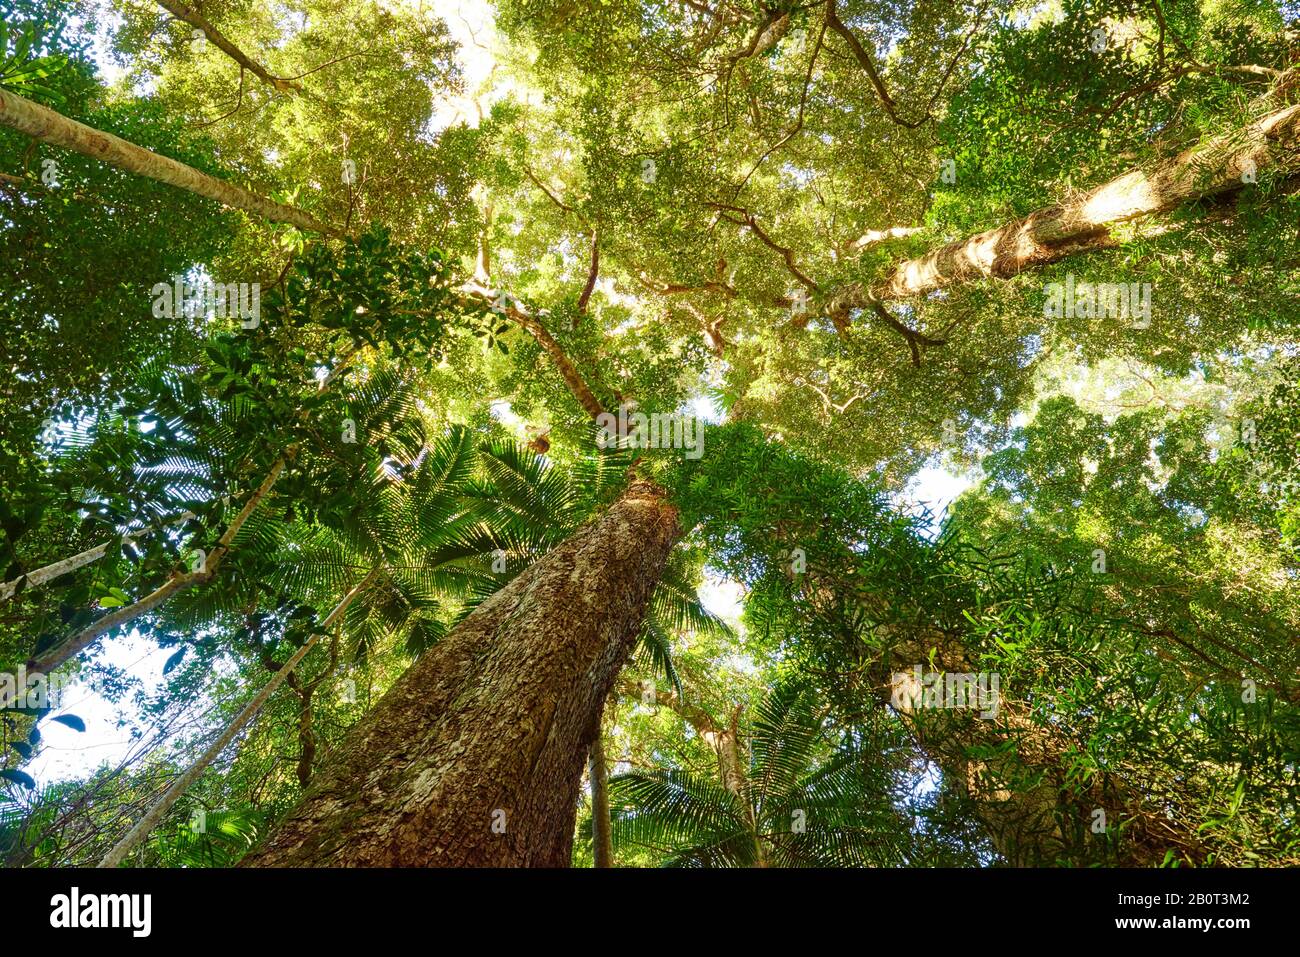 view to the canopy of a tropical rainforest, Australia, Queensland, Mary Cairncross Scenic Reserve Stock Photo